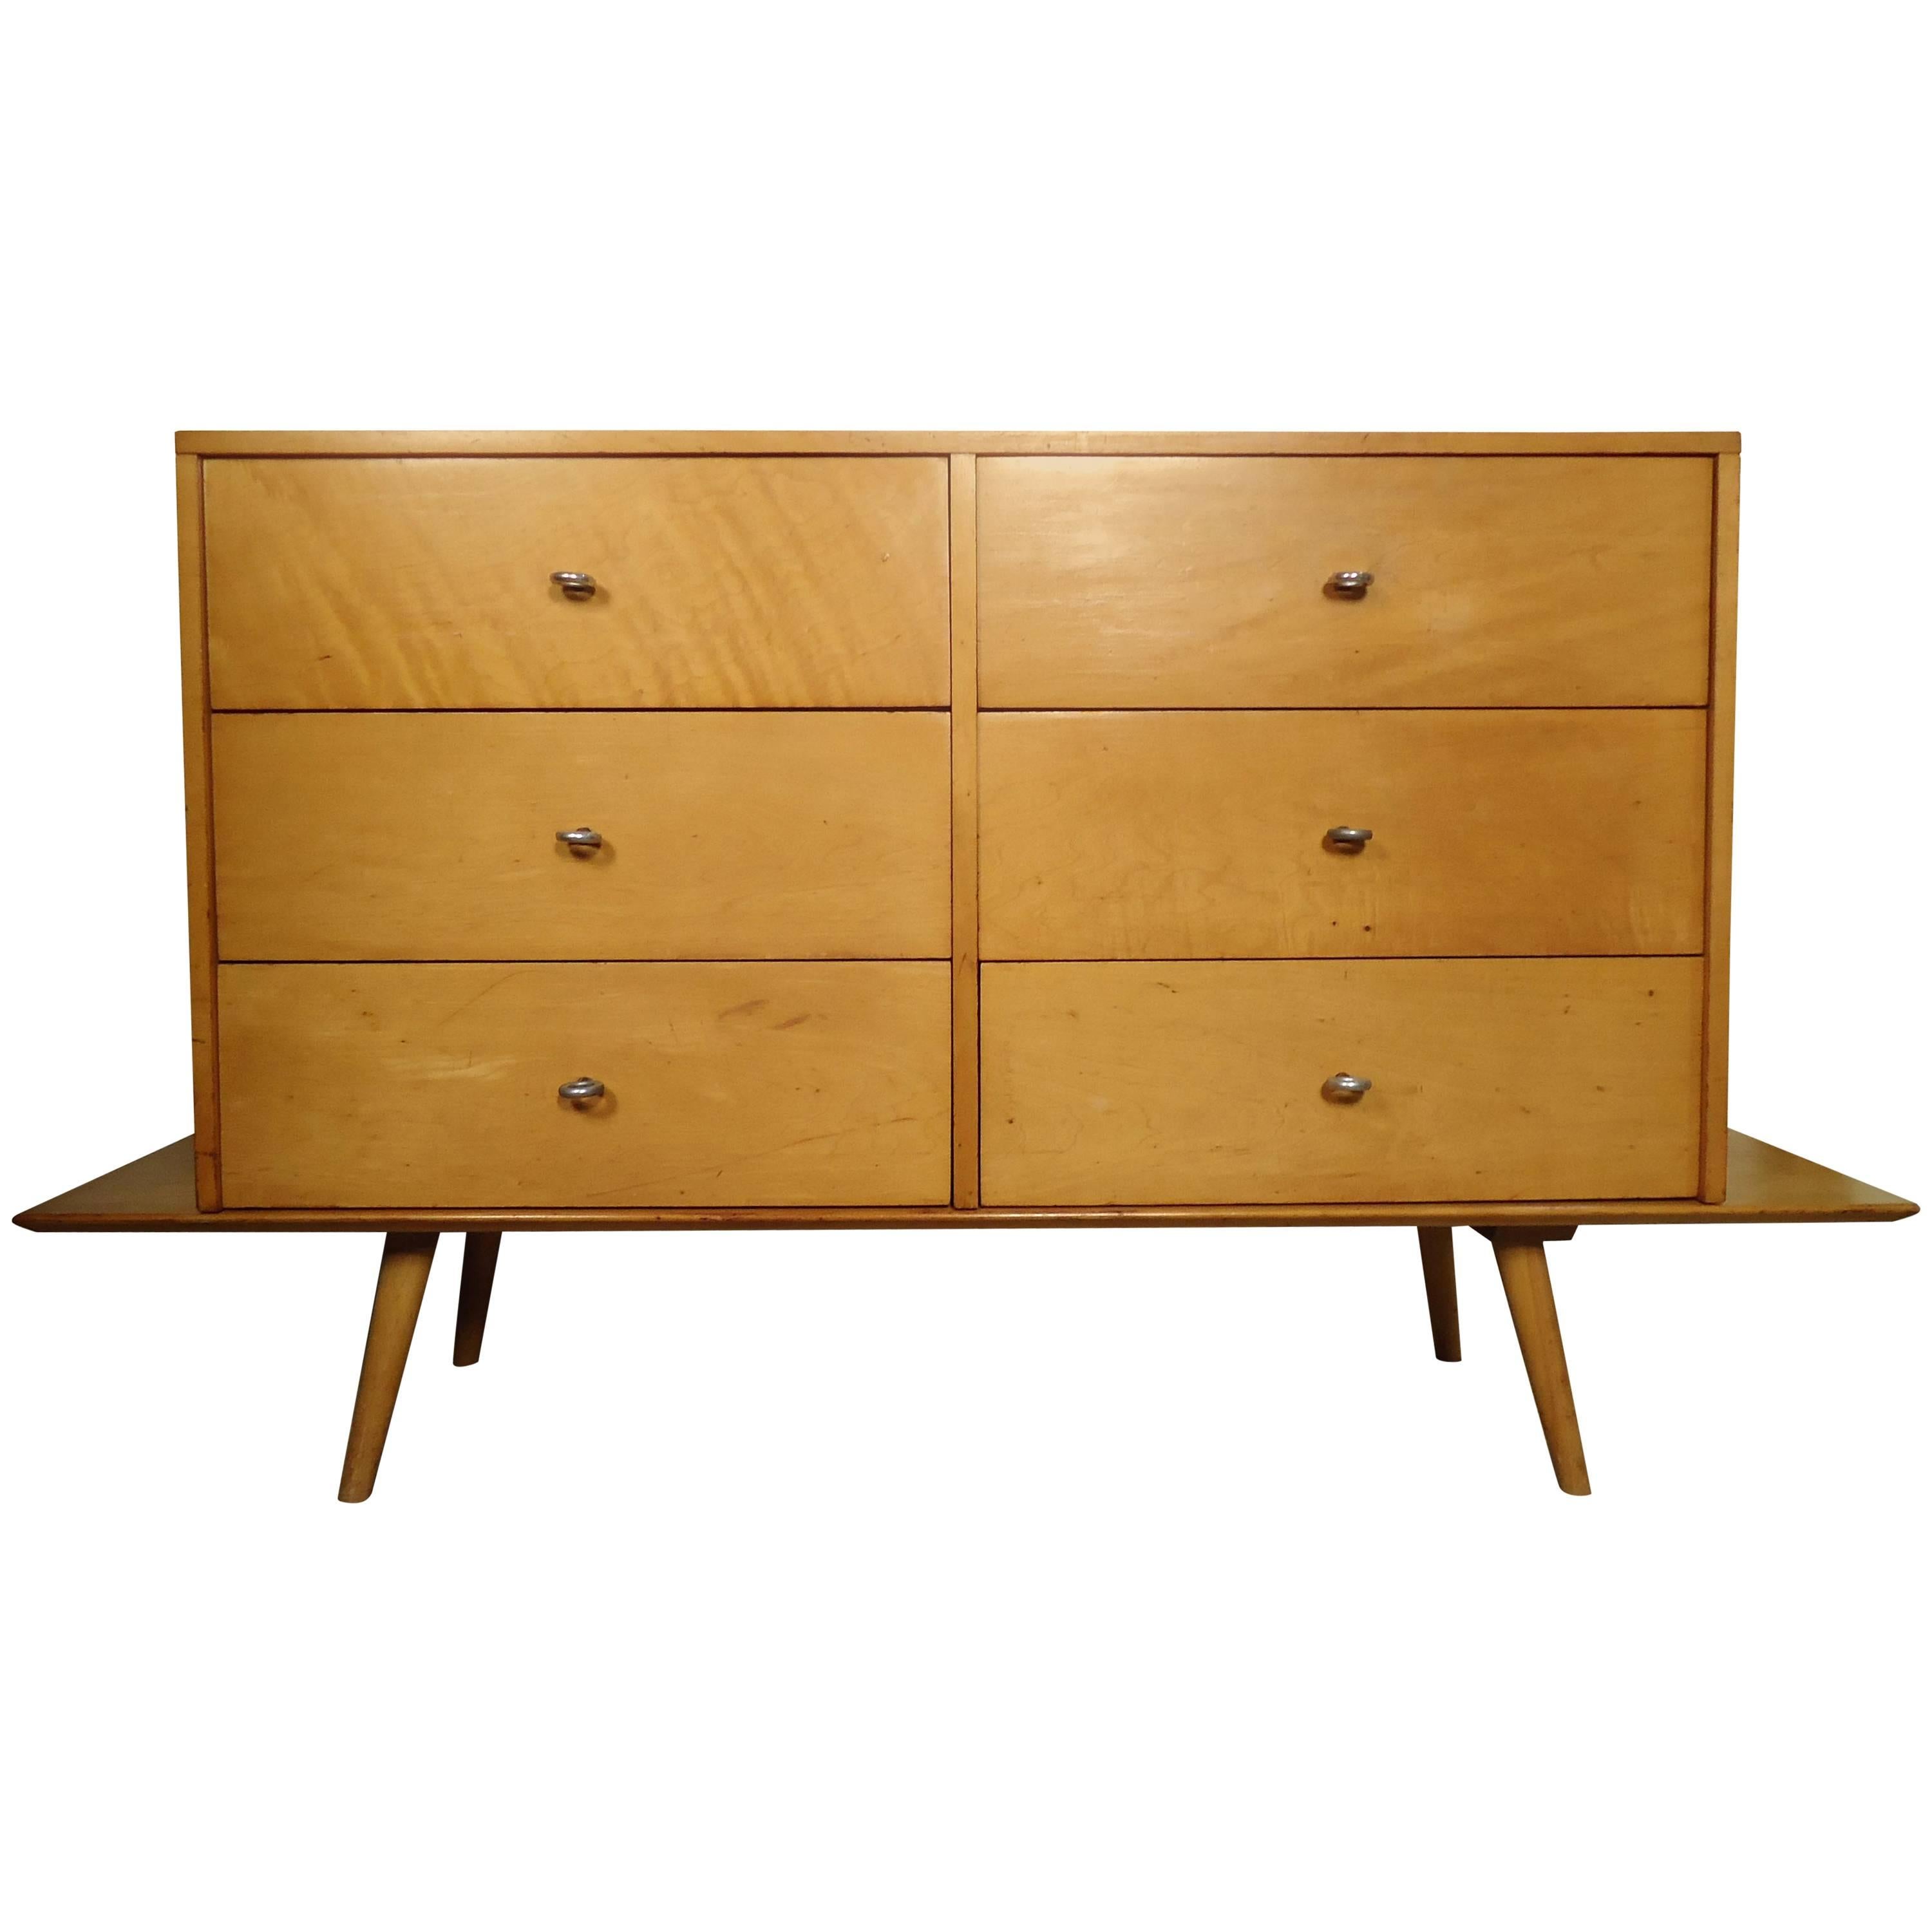 Midcentury Paul McCobb Dresser and Matching Table Base For Sale